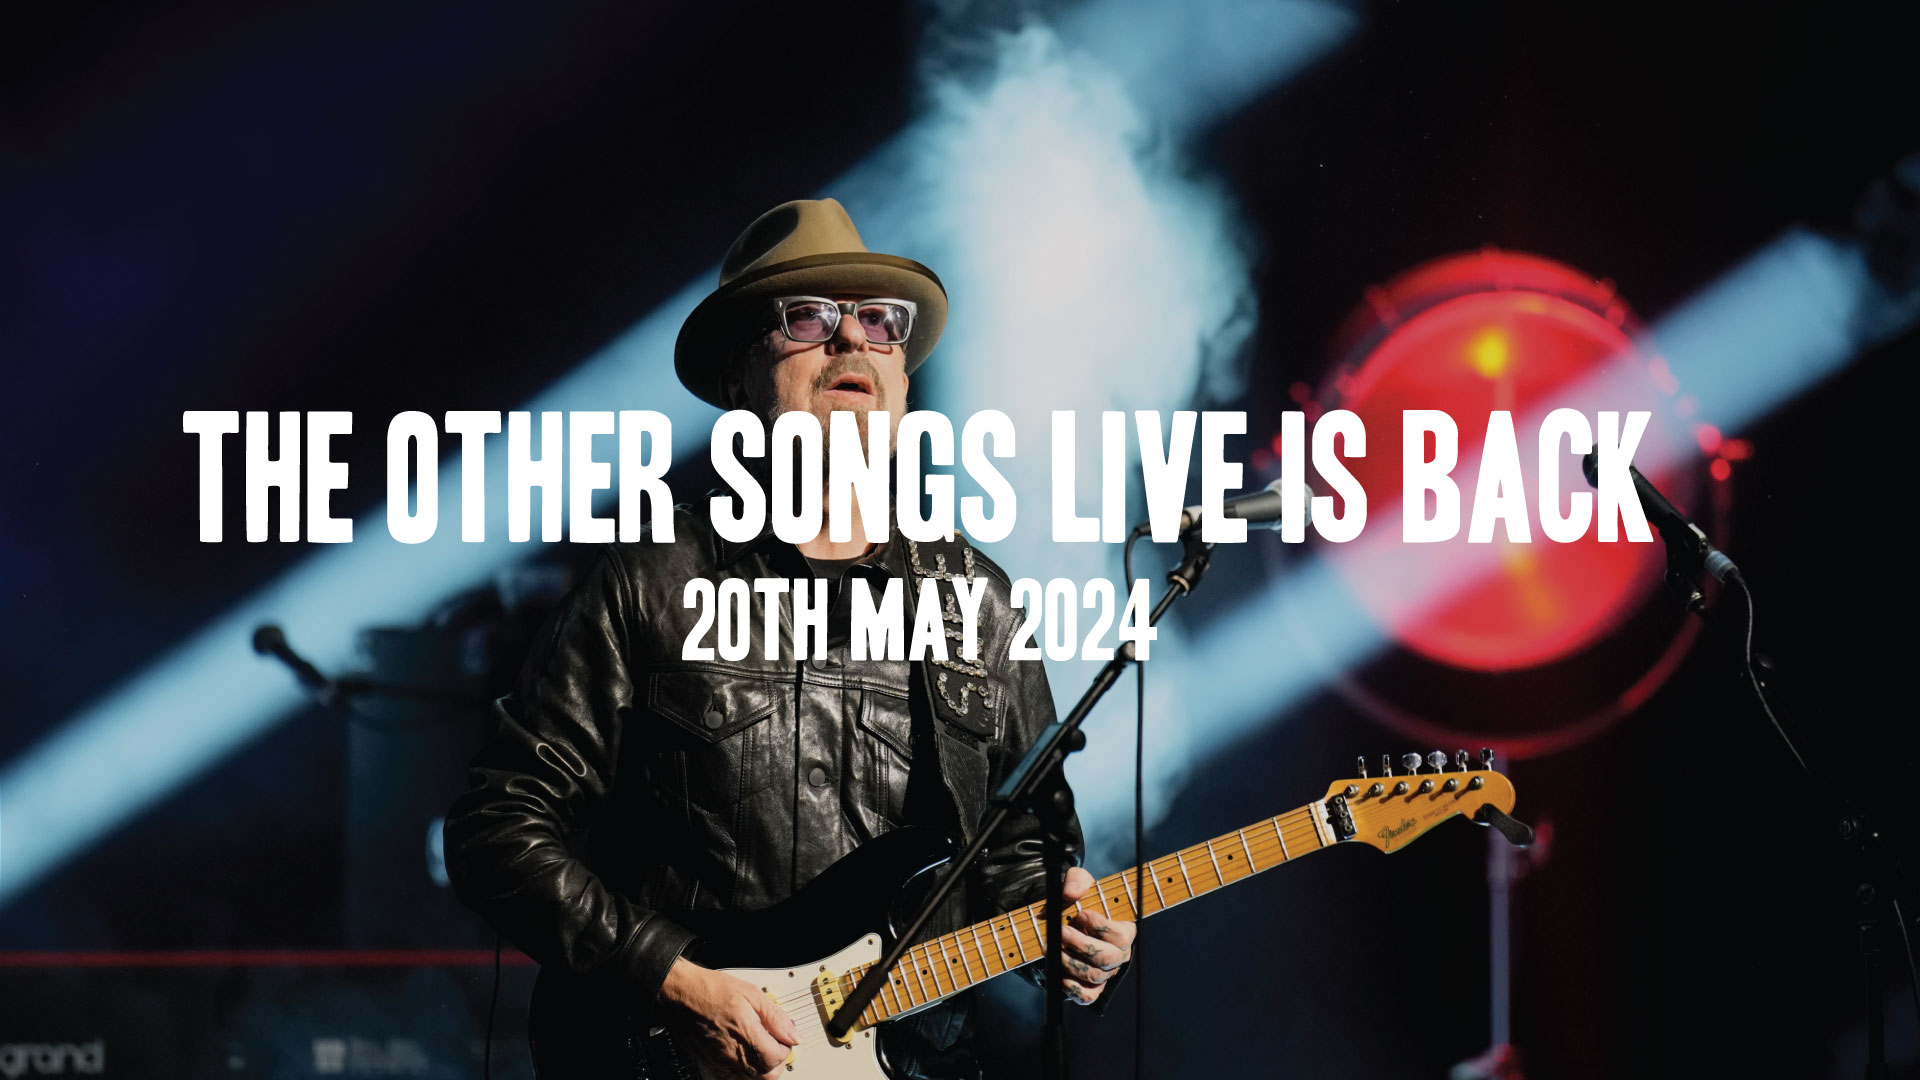 Dave Stewart playing the guitar with the text, The Other Songs Live is Back 20th May 2024